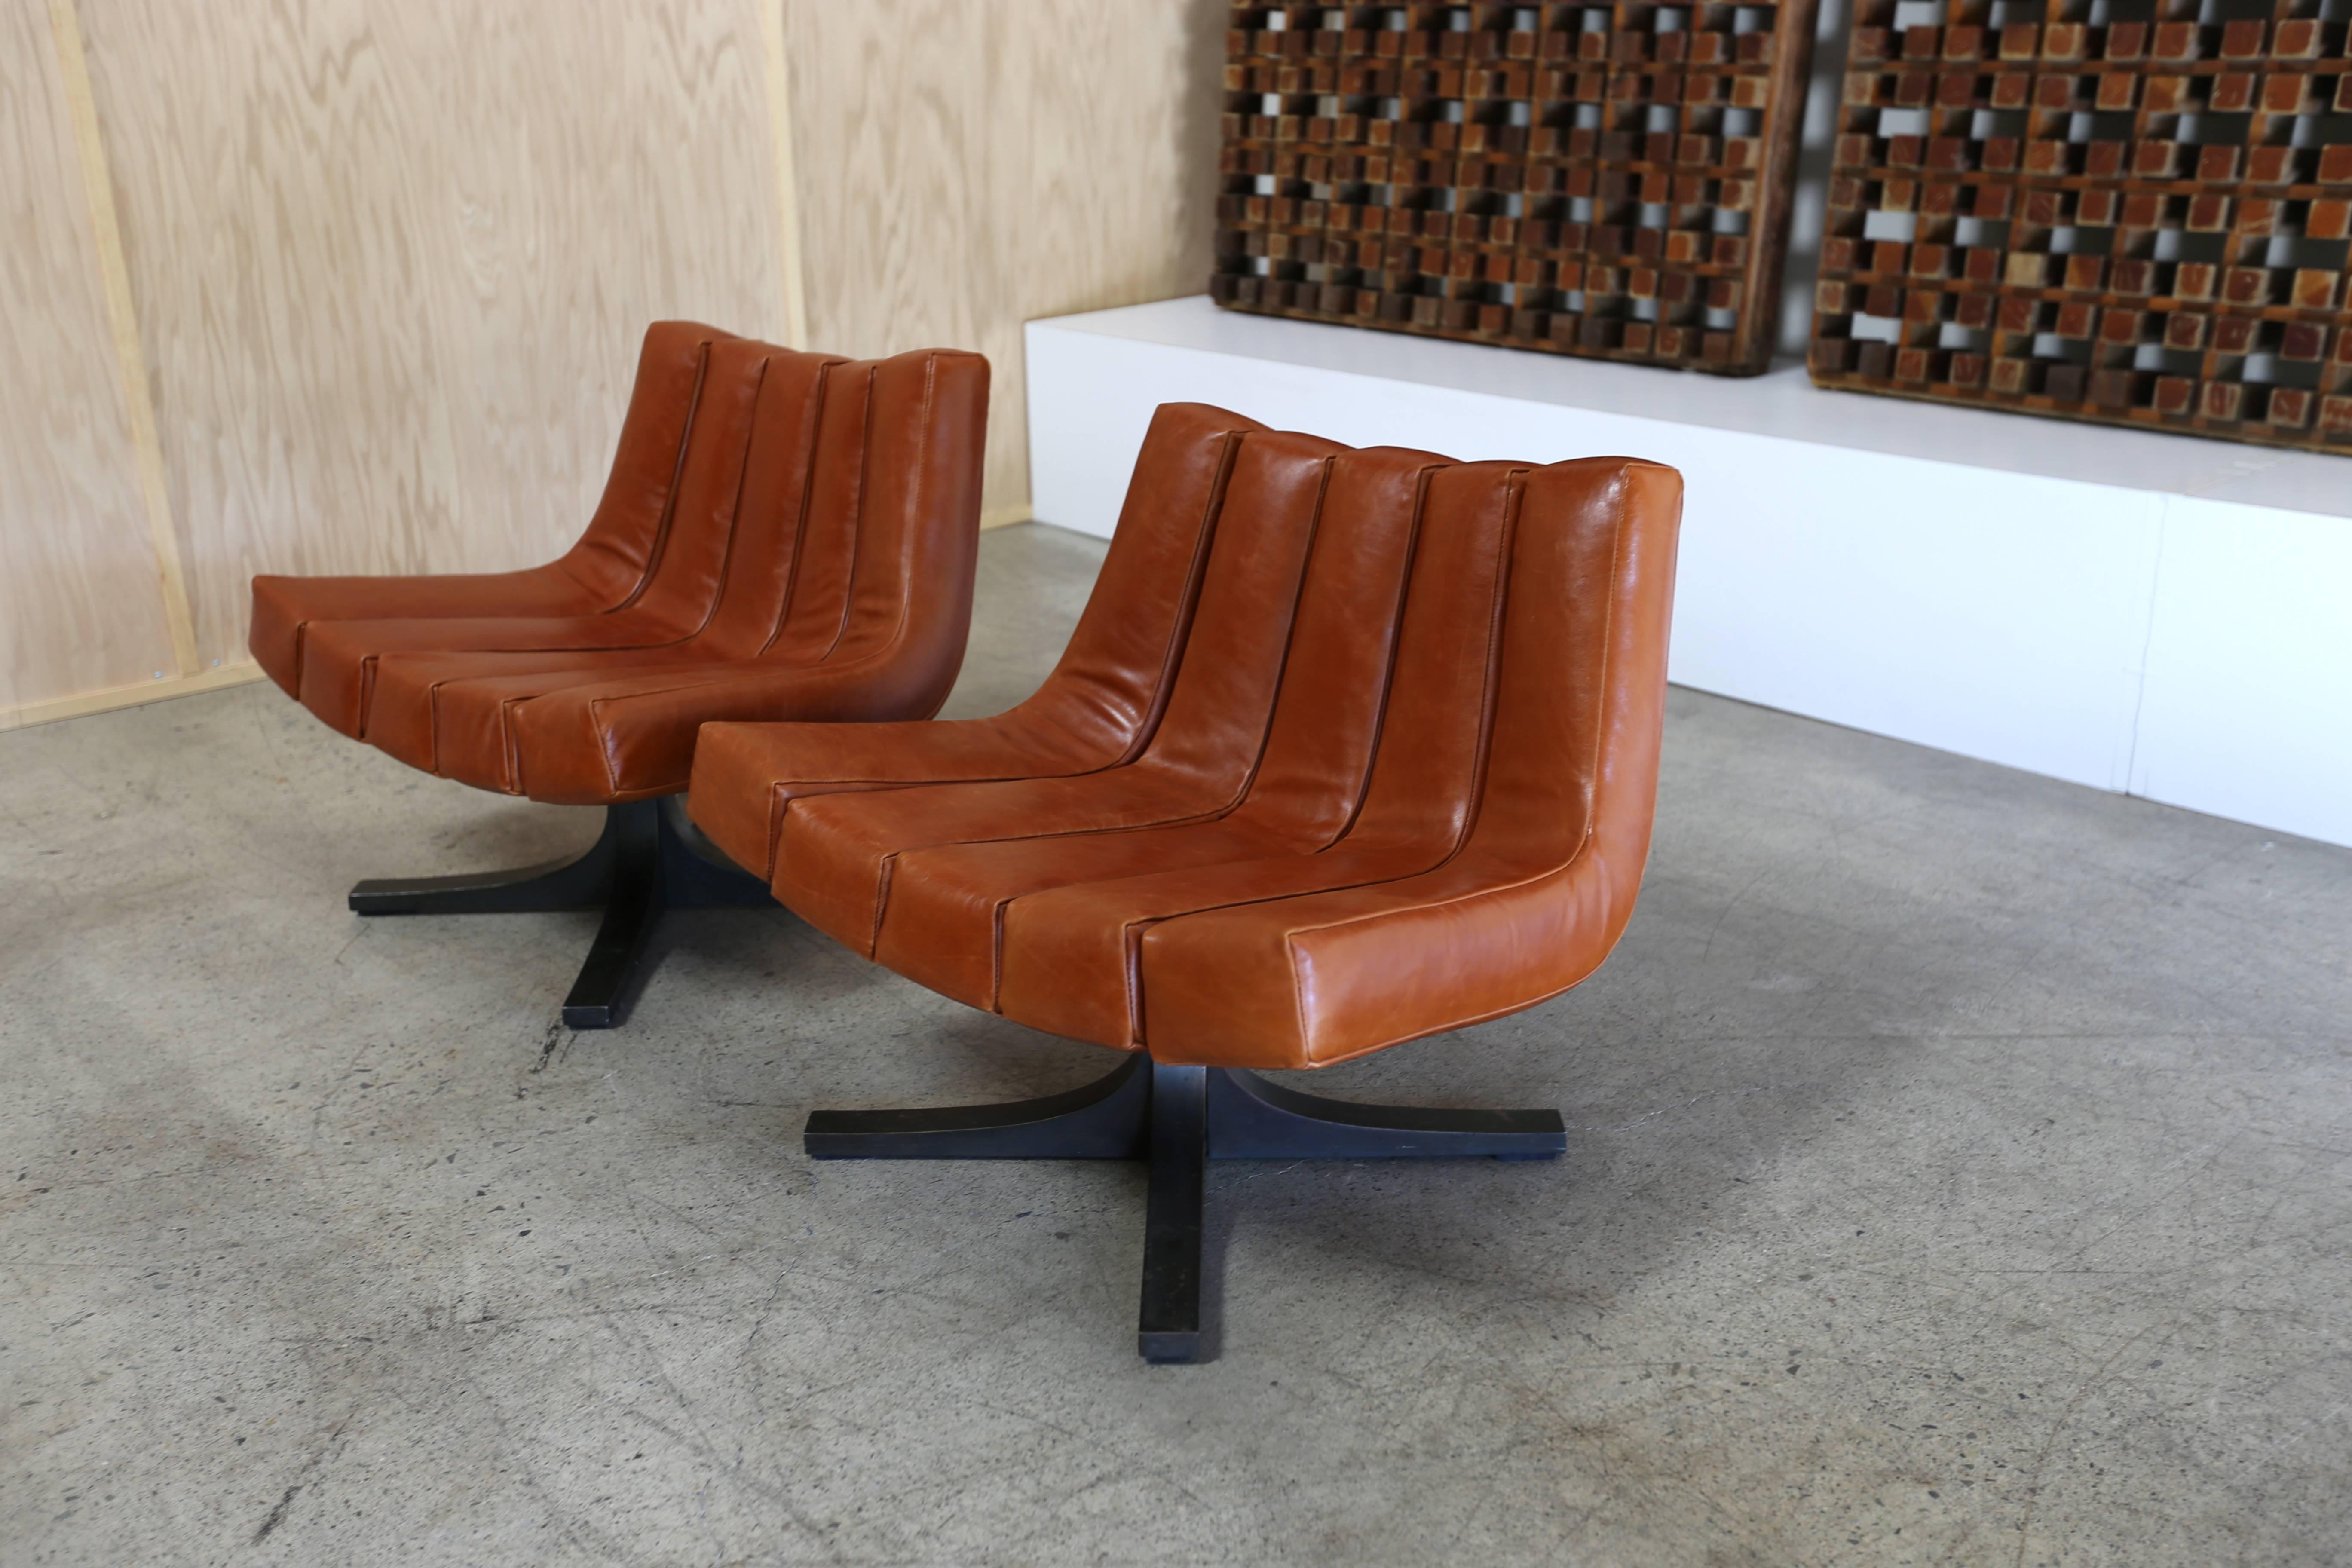 Plated Rare Pair of Swivel Lounge Chairs by Javier Carvajal